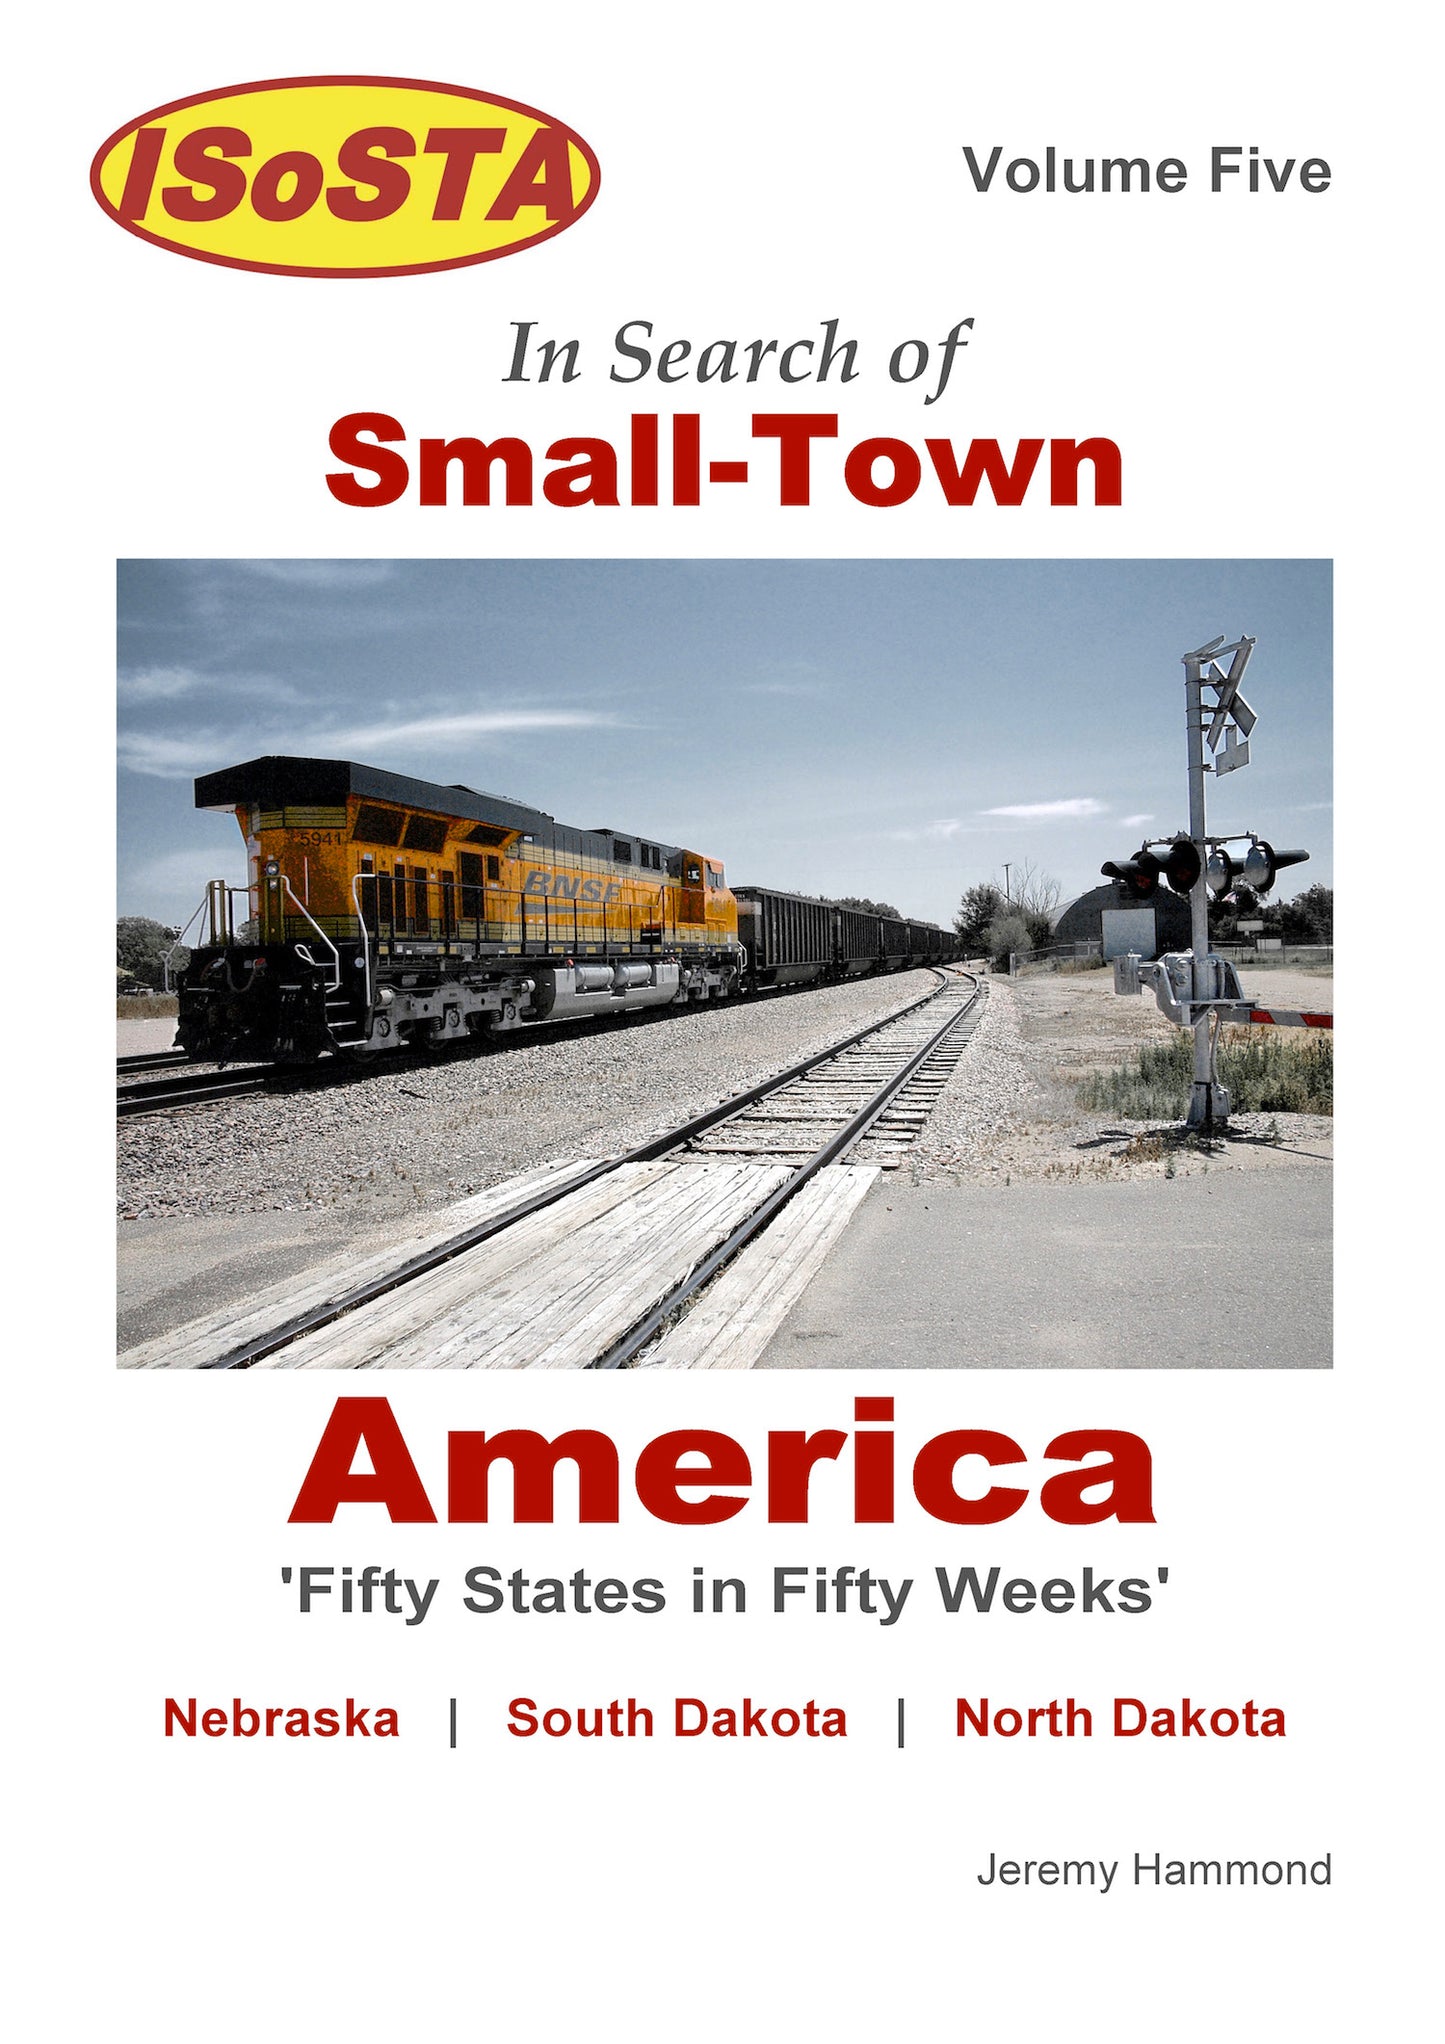 In Search of Small-Town America: Volume 5